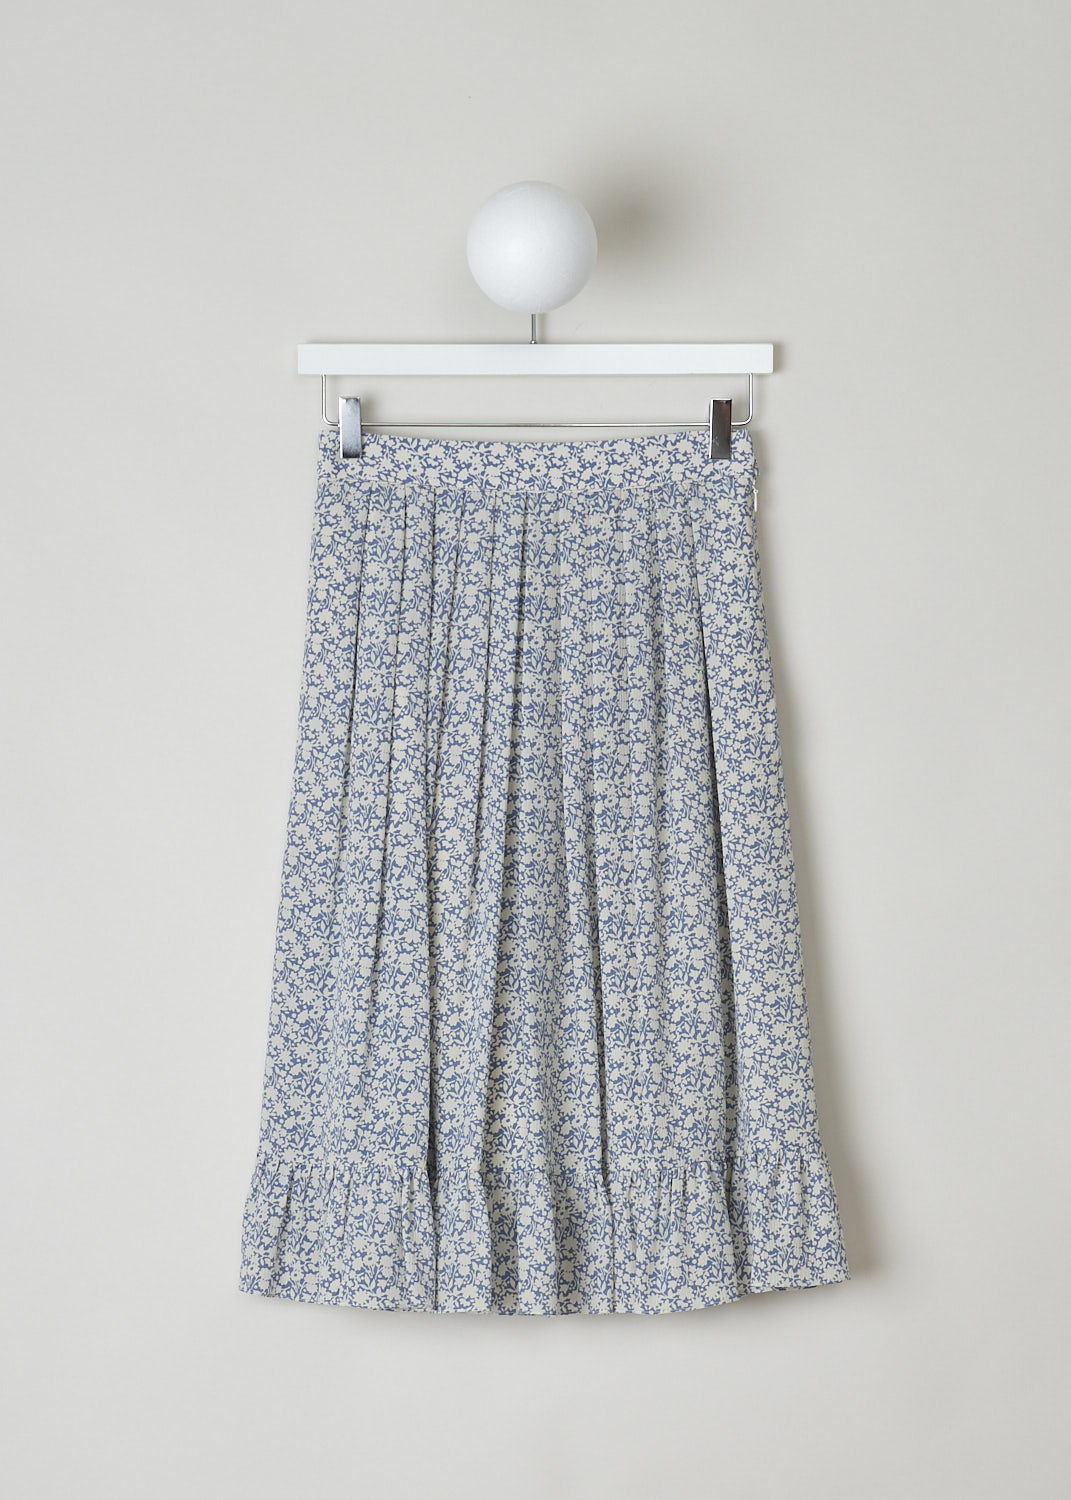 CELINE, BLUE AND WHITE FLORAL MIDI SKIRT, 757L_2J264_07BW, Blue, White, Print, Front, This blue and white floral pleated skirt has a concealed side zip, concealed slanted pockets and a flounce hemline. The skirt is midi length and is fully lined. 
